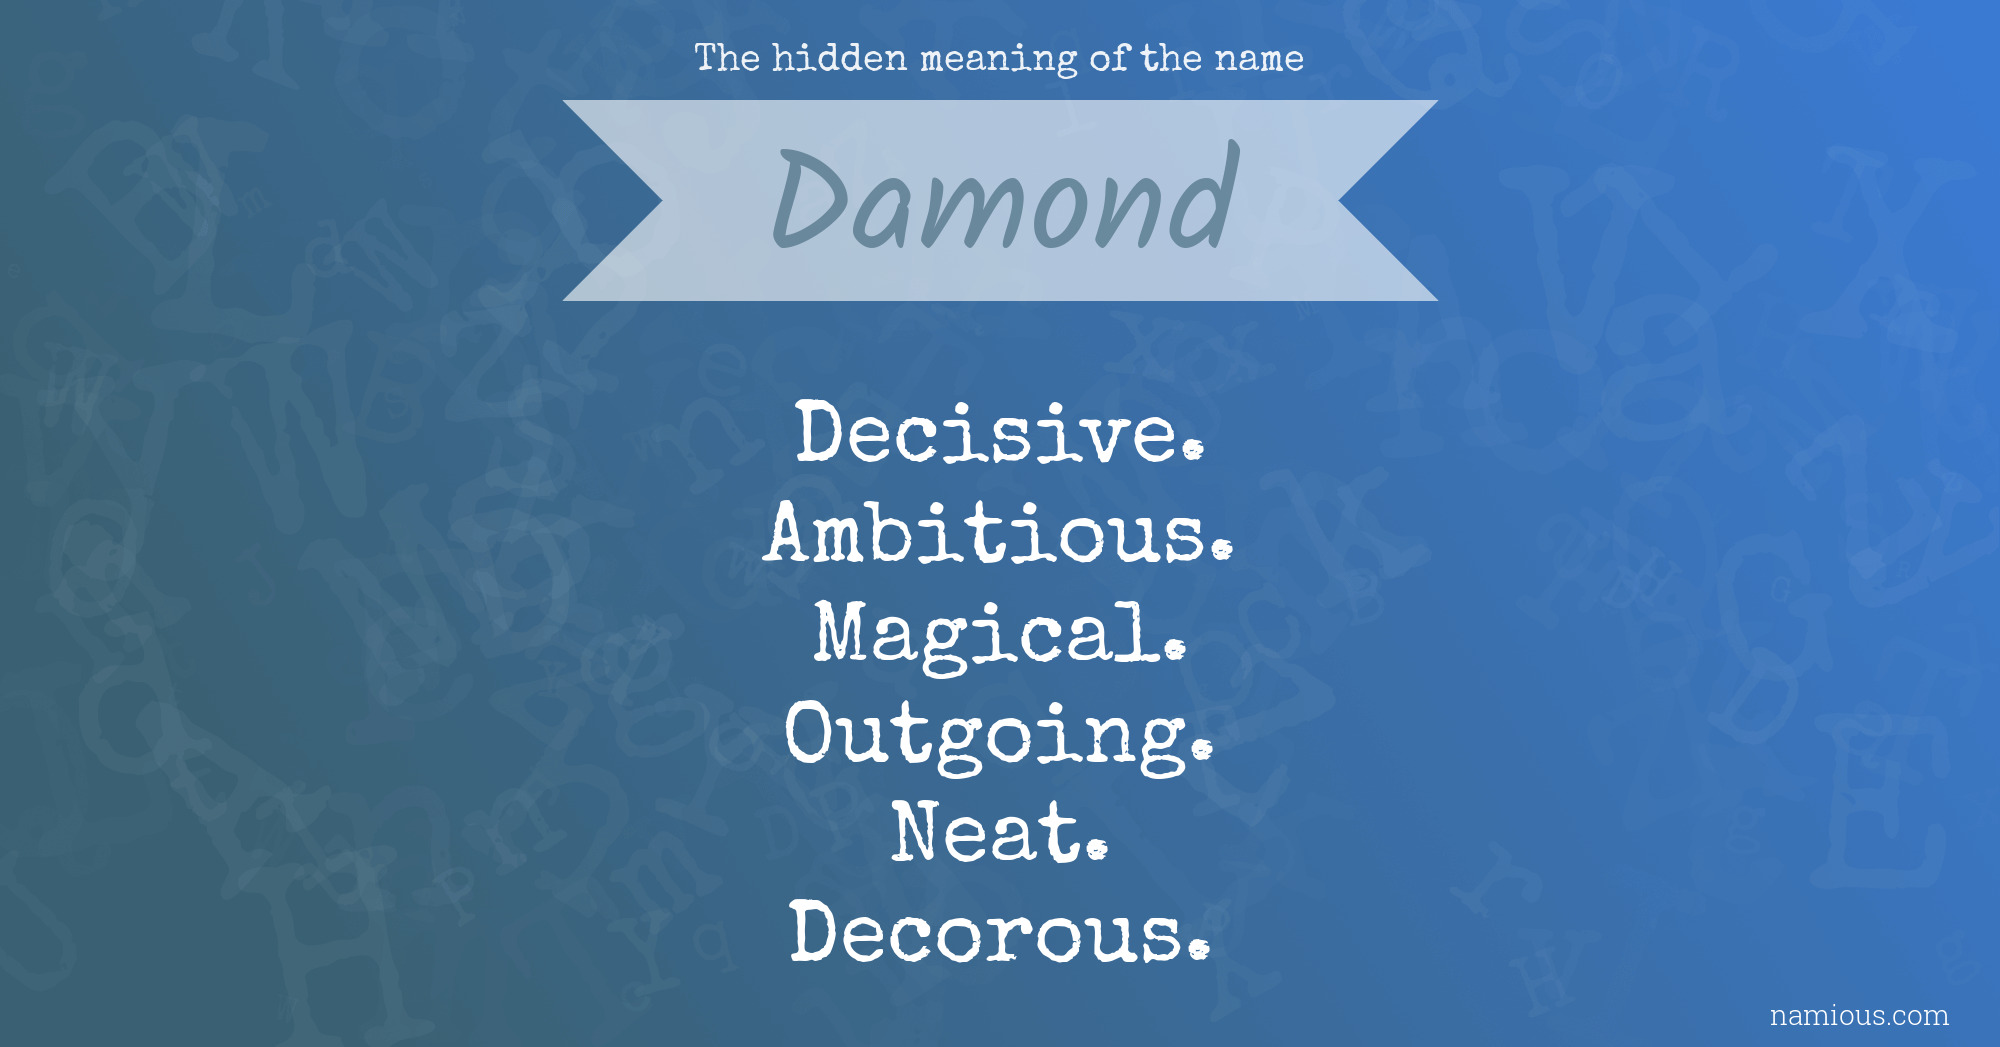 The hidden meaning of the name Damond